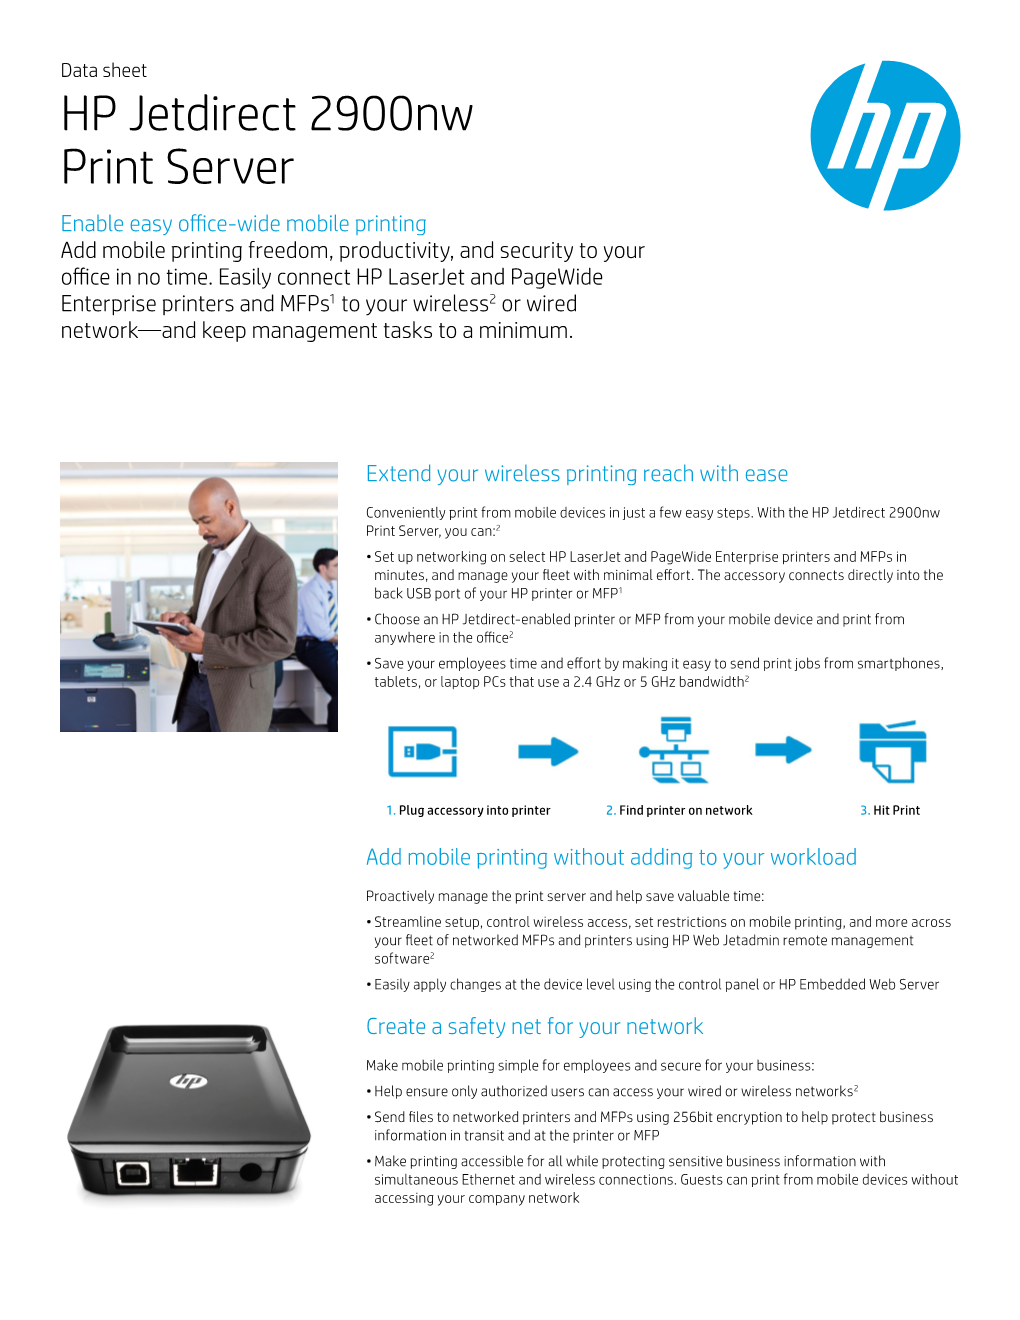 HP Jetdirect 2900Nw Print Server Enable Easy Office-Wide Mobile Printing Add Mobile Printing Freedom, Productivity, and Security to Your Office in No Time